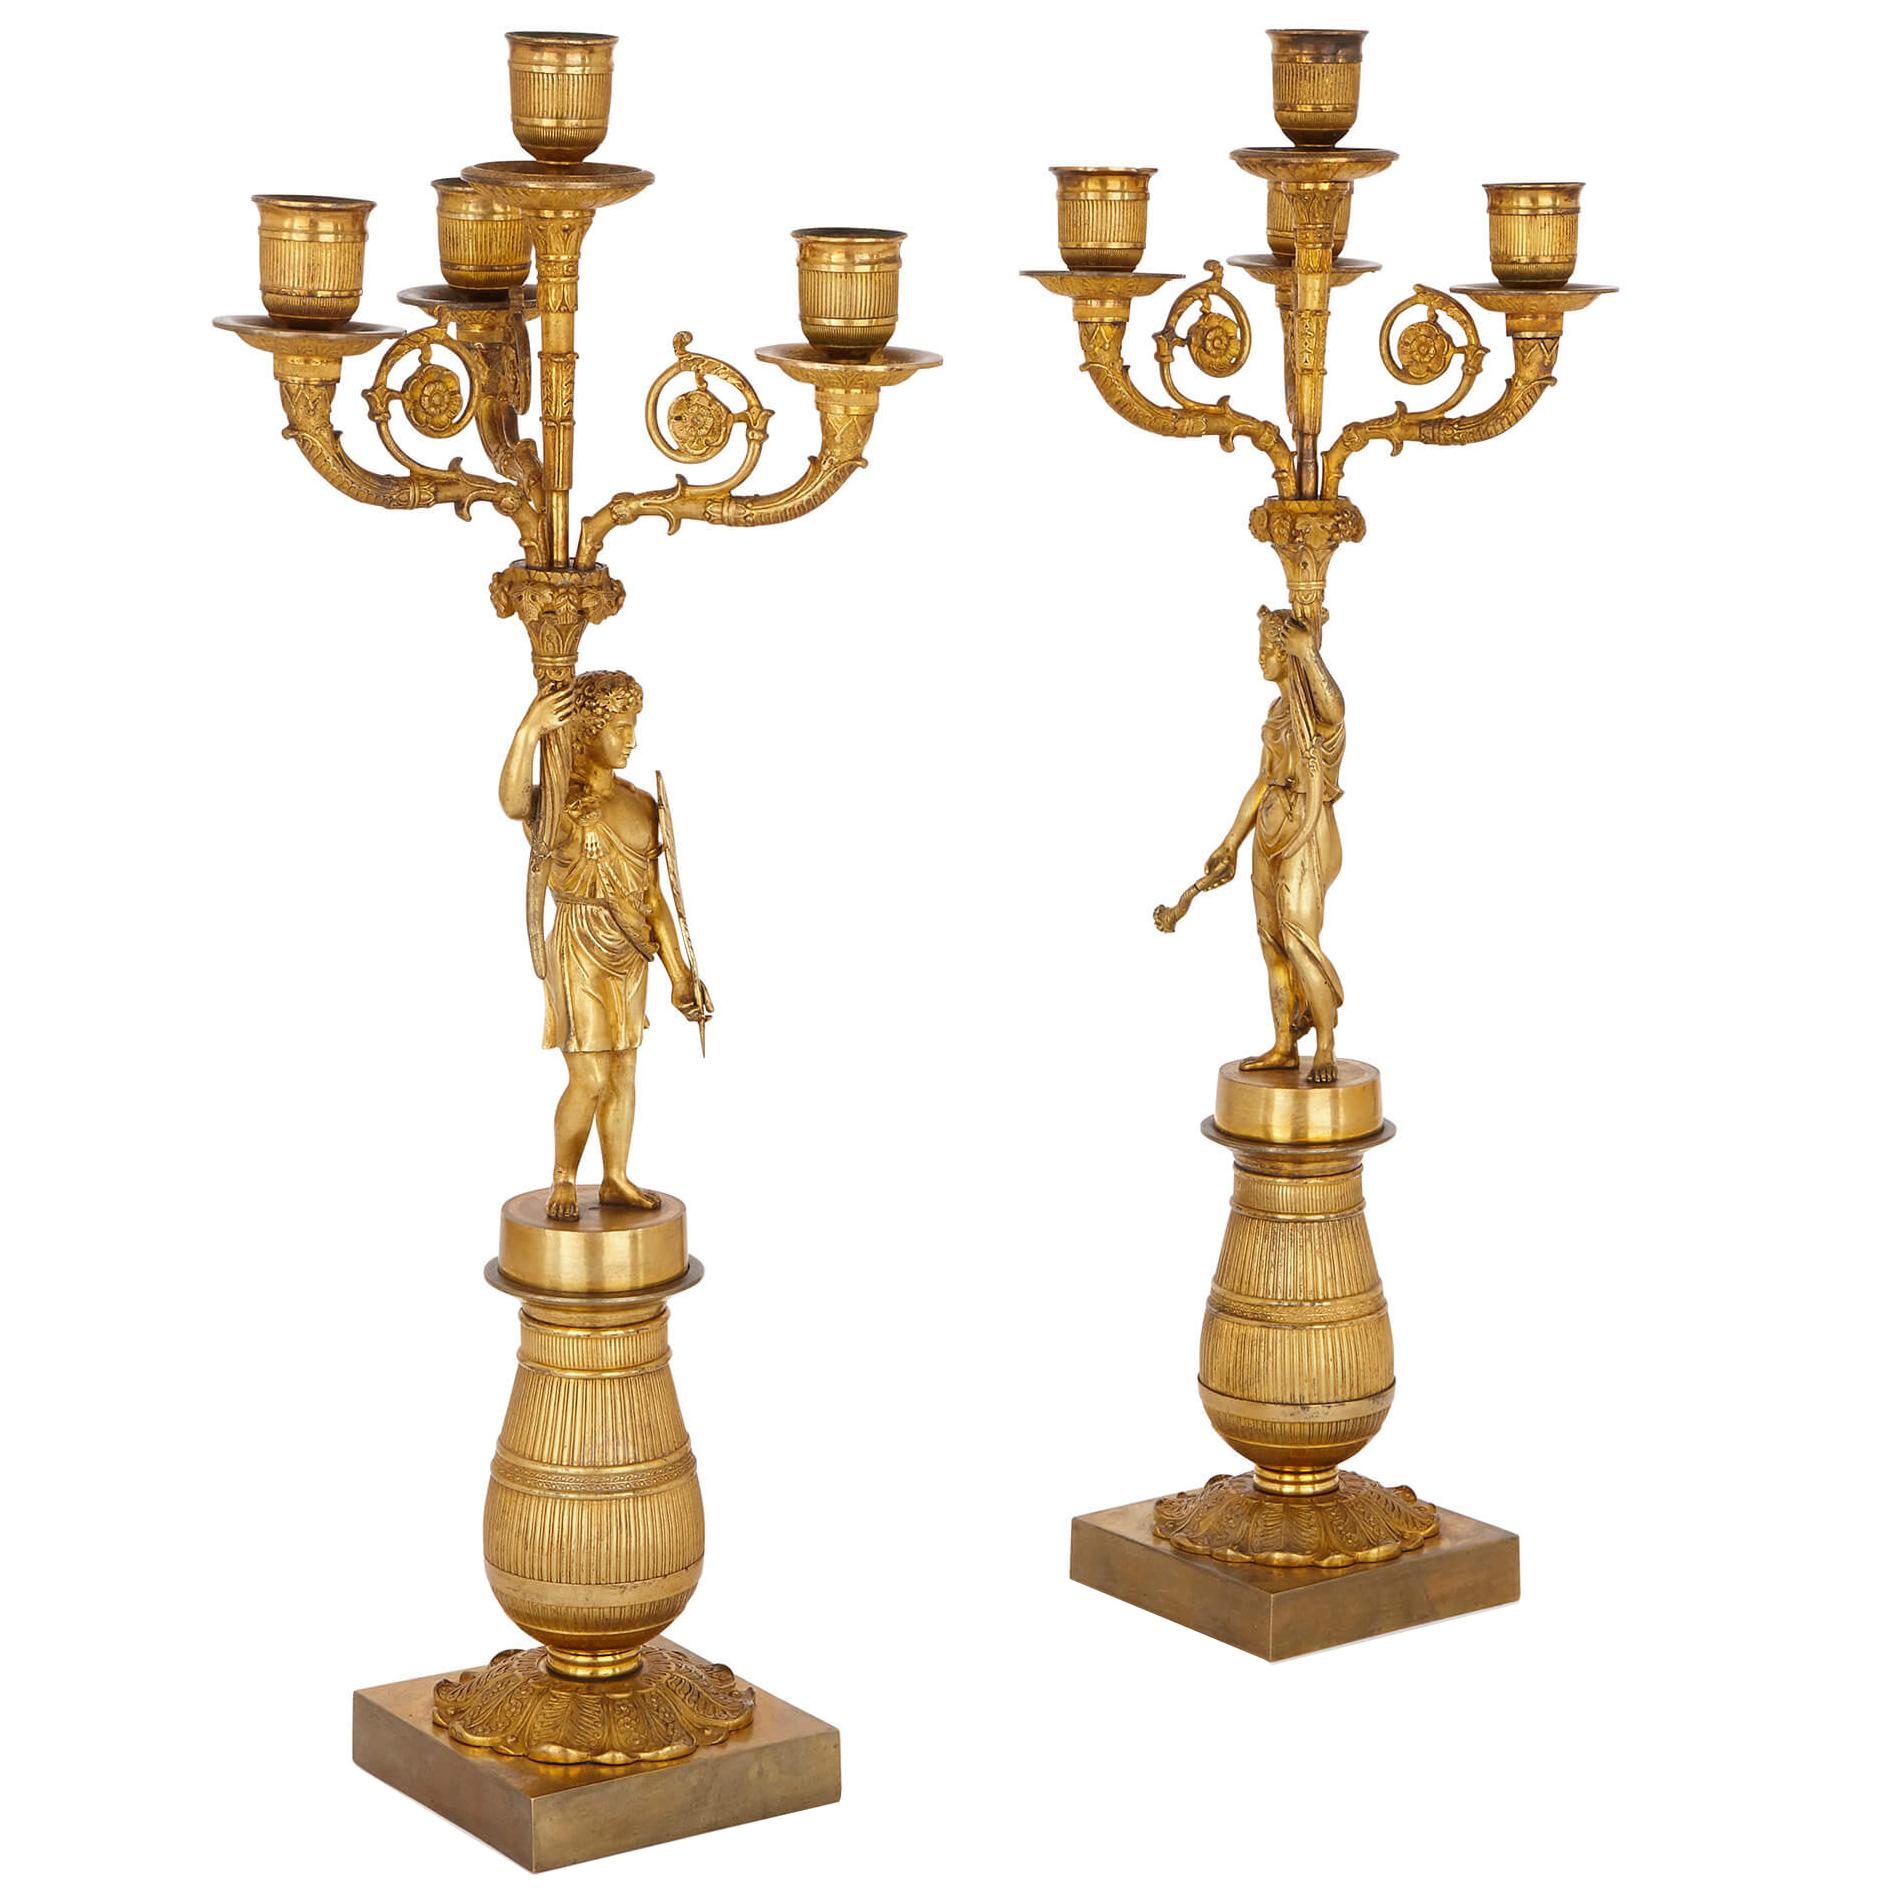 Two Early 19th Century French Empire Gilt Bronze Candelabra For Sale